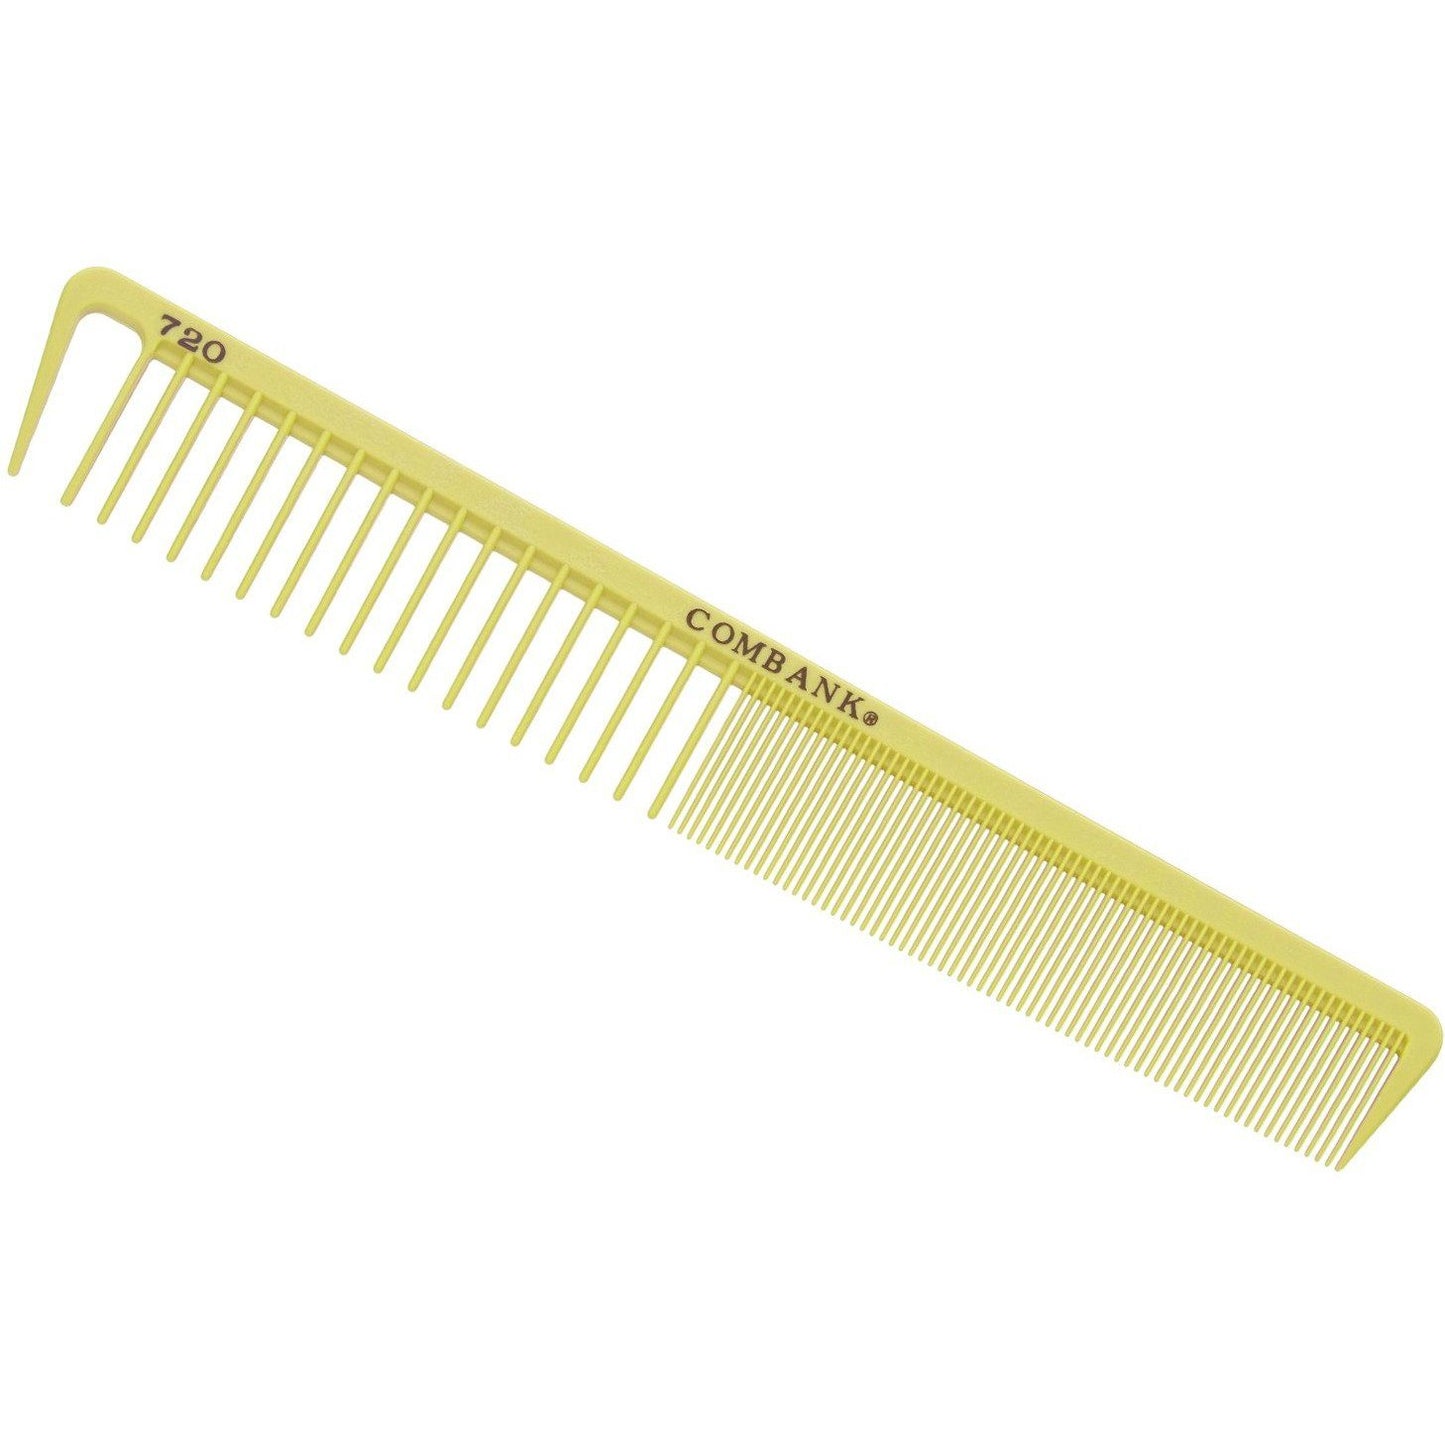 Combank 720 Wide/Fine Combs Hairbrained Yellow 